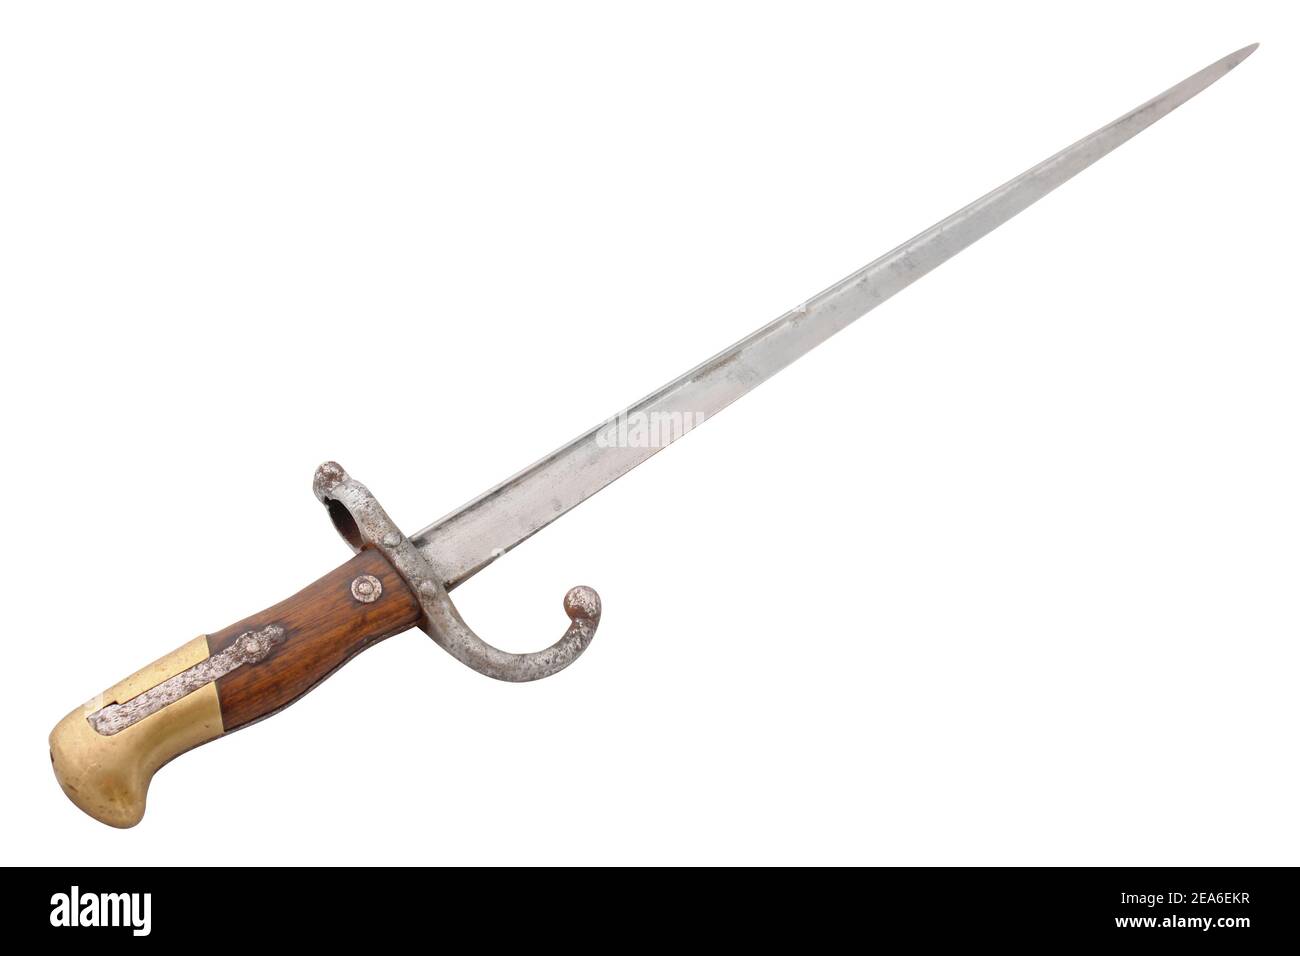 Vintage French infantry bayonet (model of 1874 to Gra rifle). Used during the First world war and then party of these rifles was sold to Poland army b Stock Photo